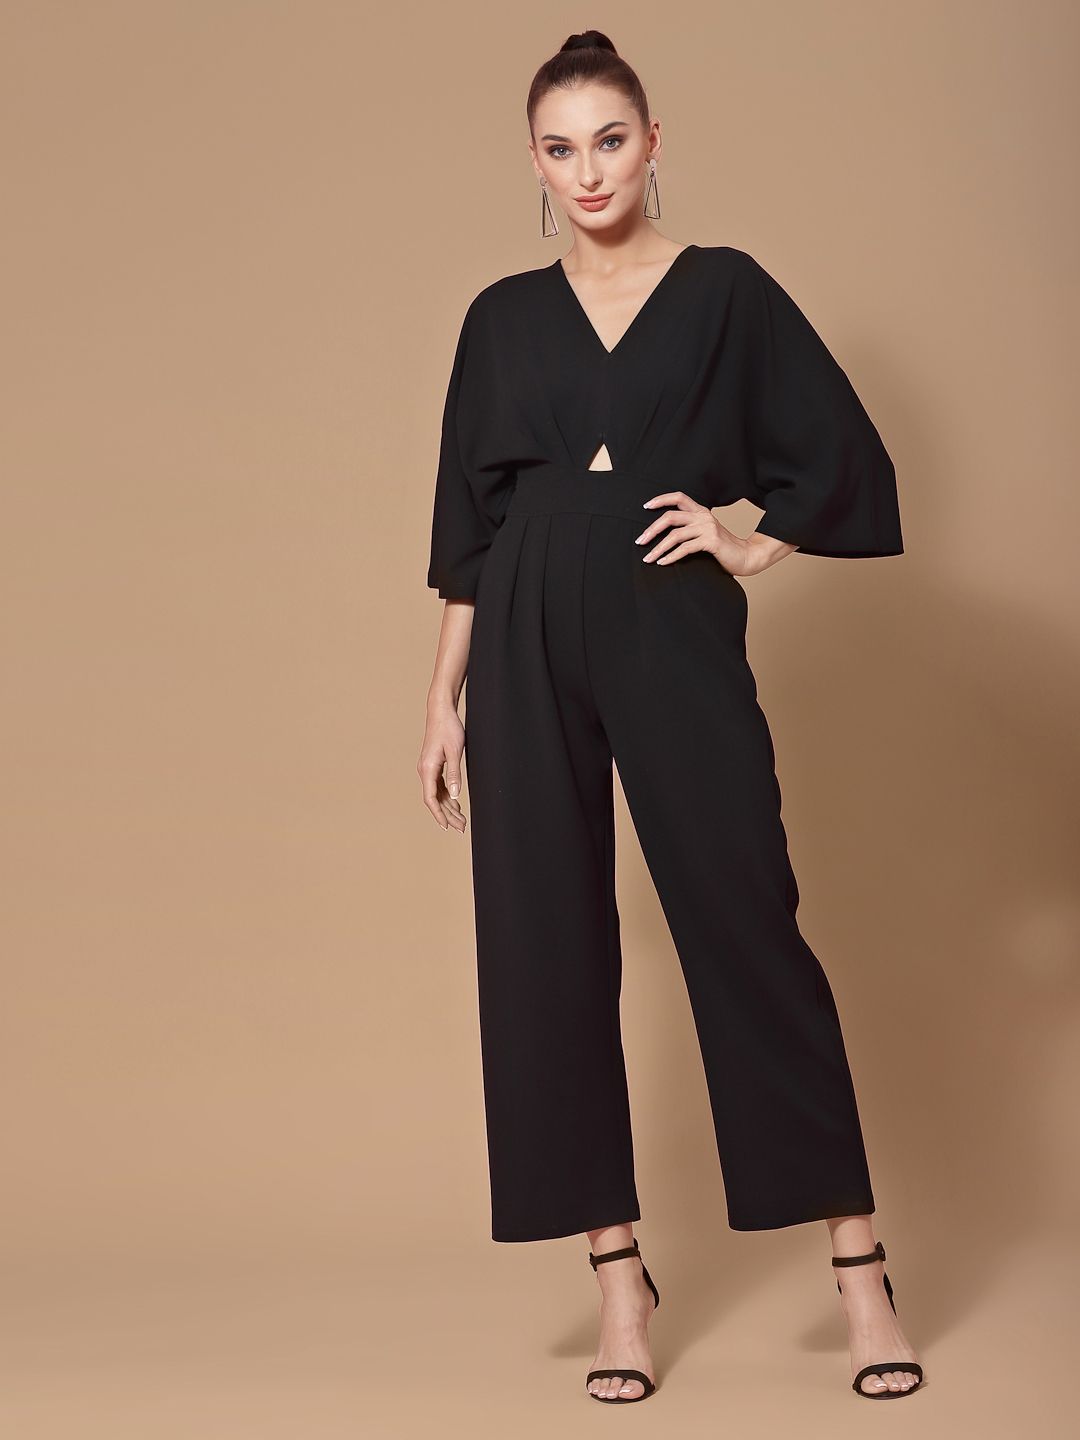 KASSUALLY Black Solid Basic Jumpsuit Price in India